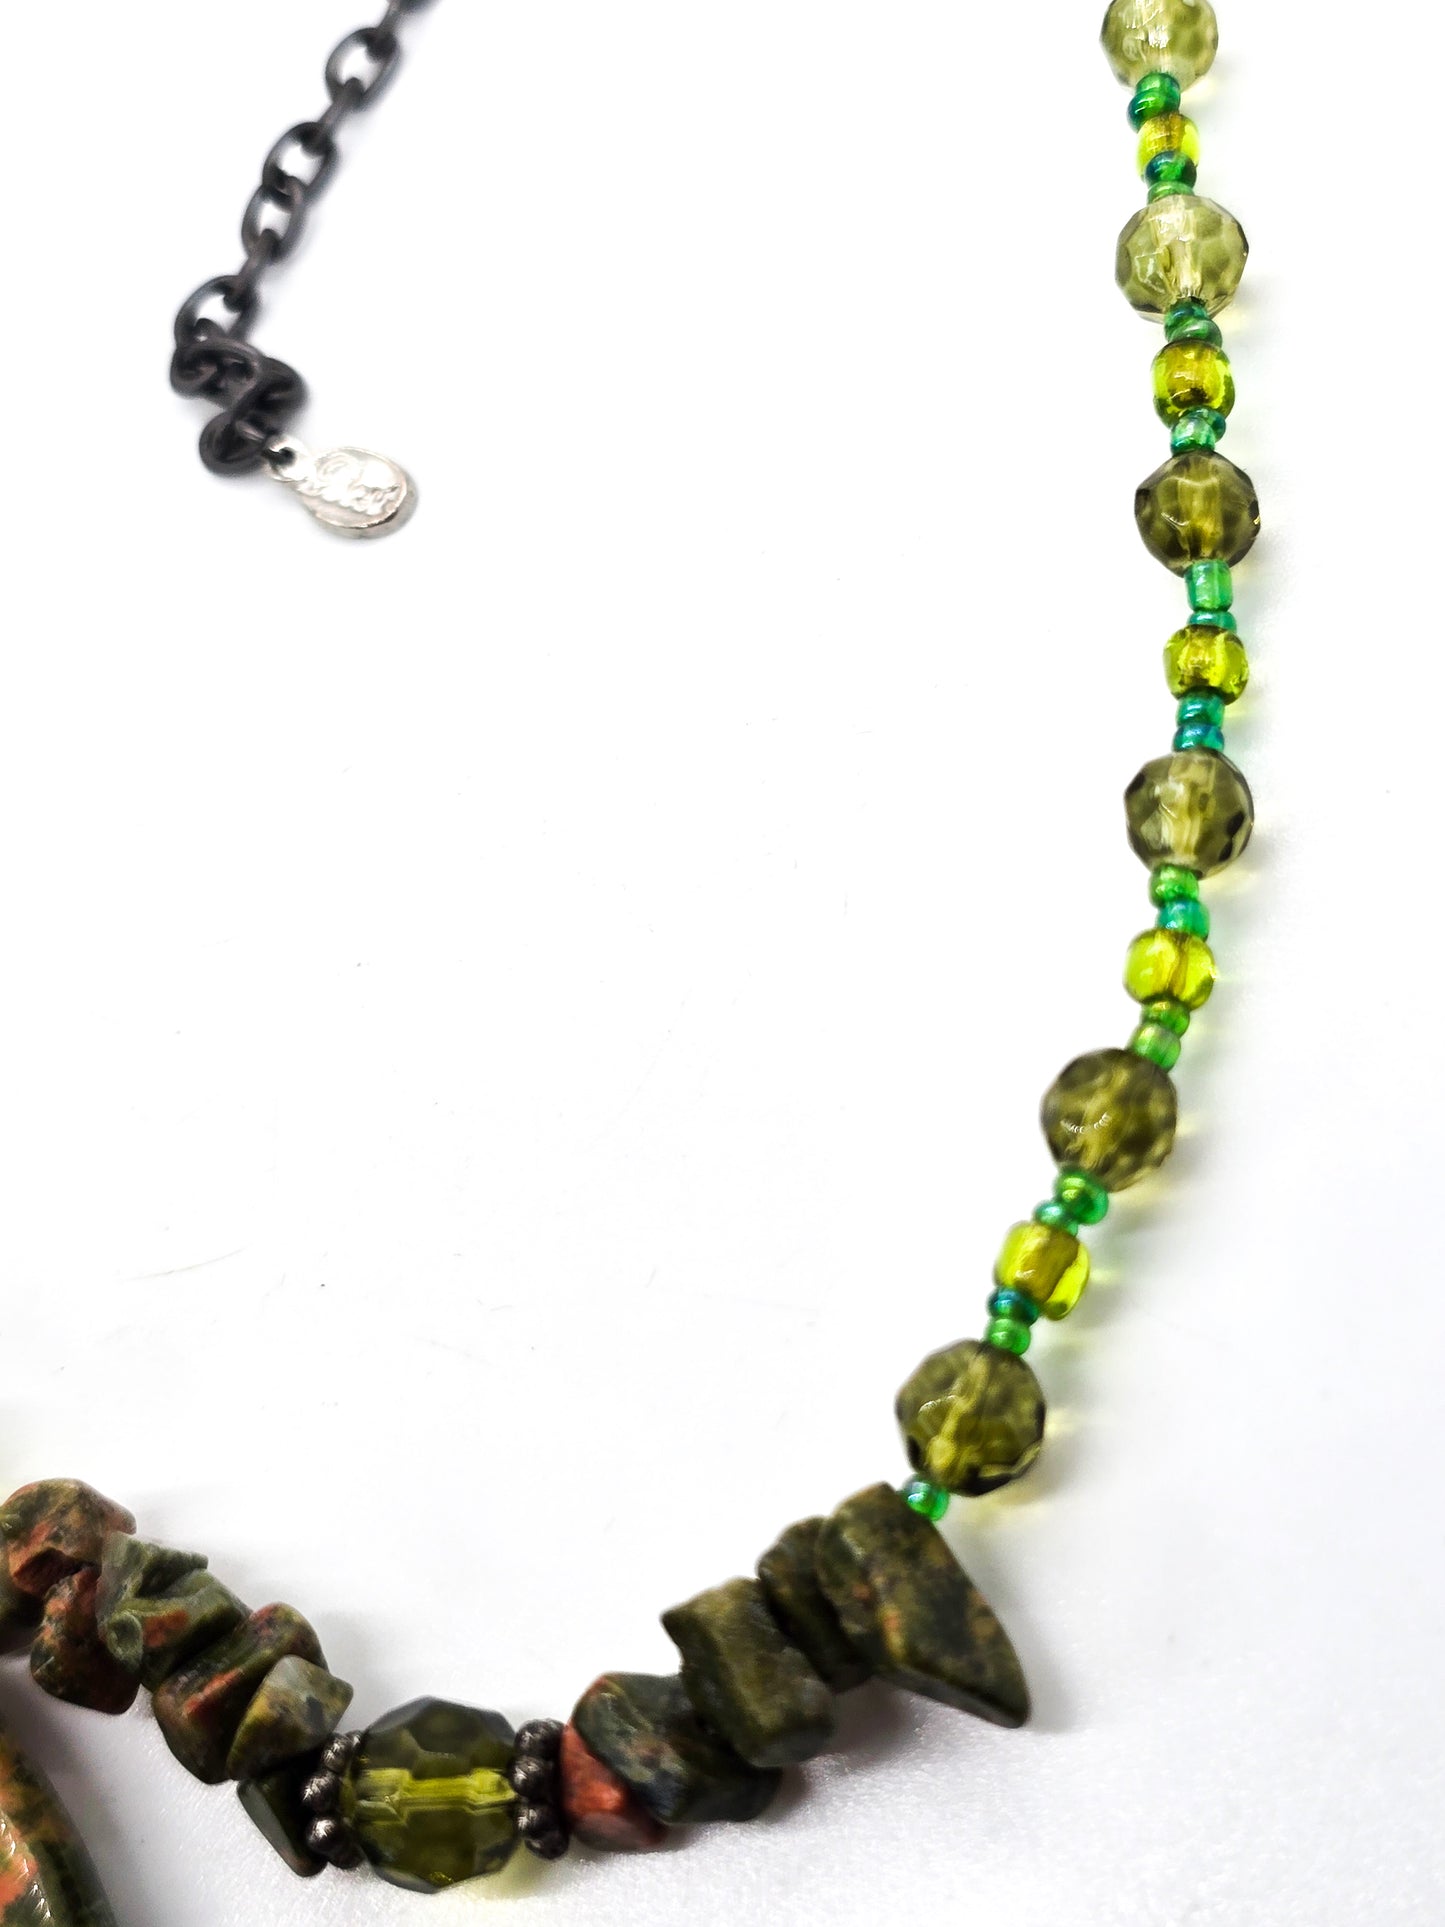 Unakite large pendant chip necklace with green peridot gemstone accents